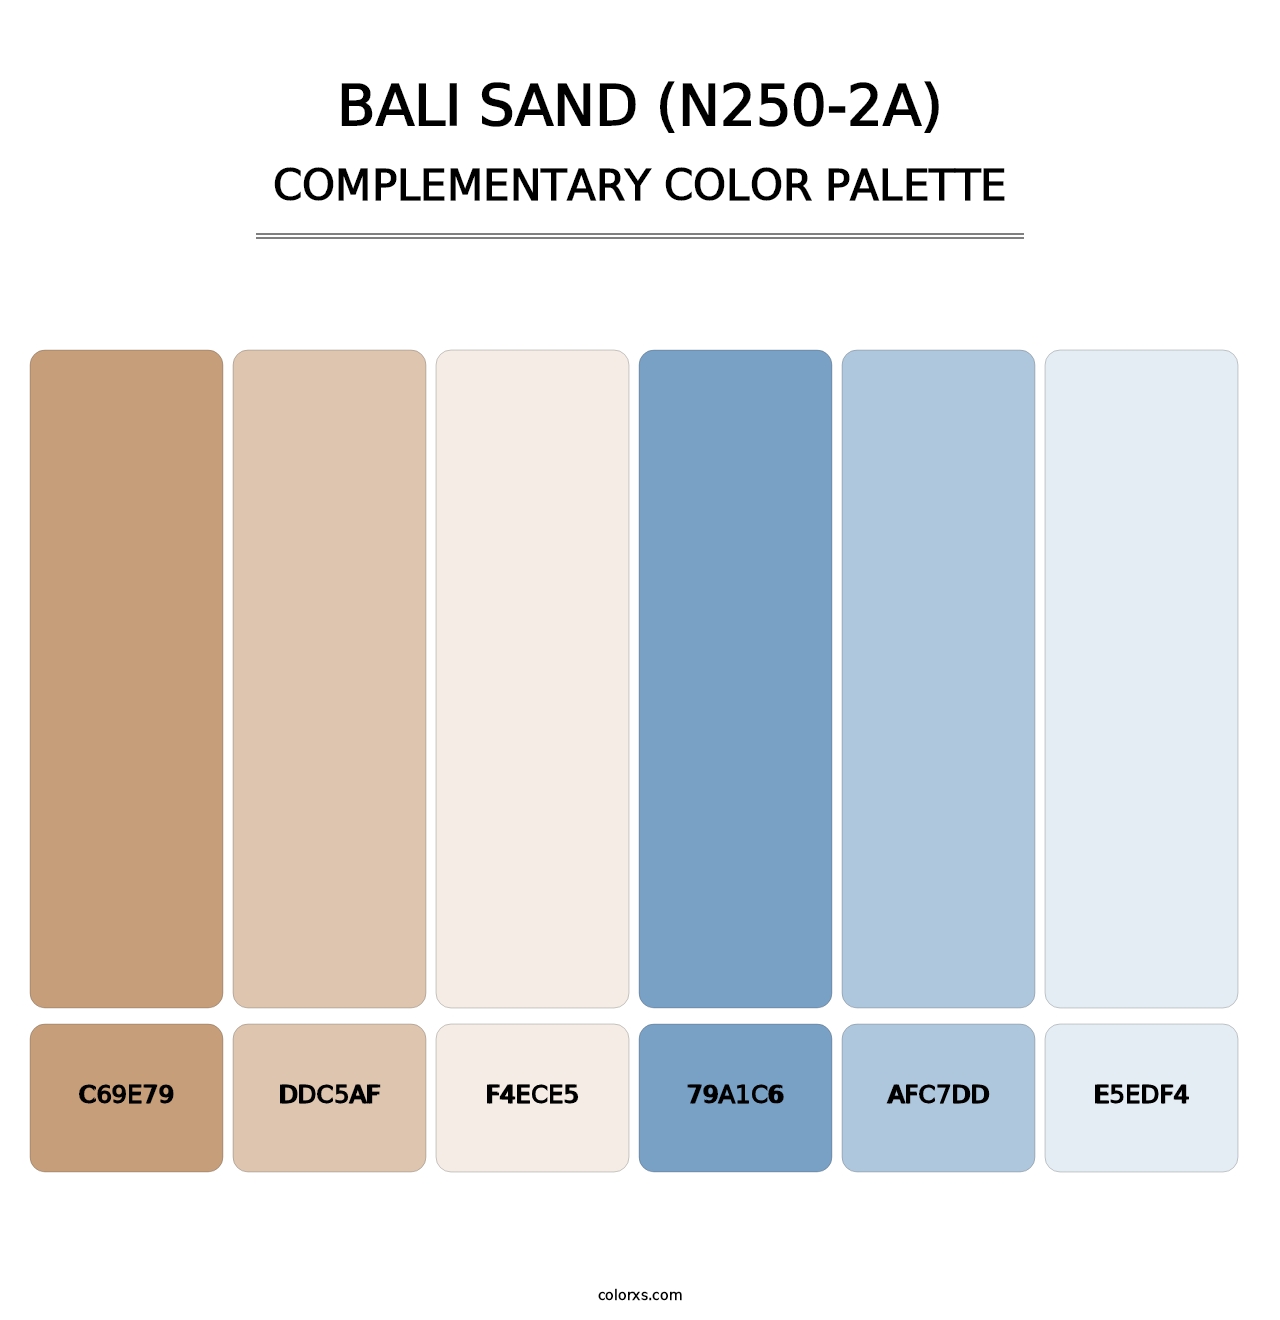 Bali Sand (N250-2A) - Complementary Color Palette